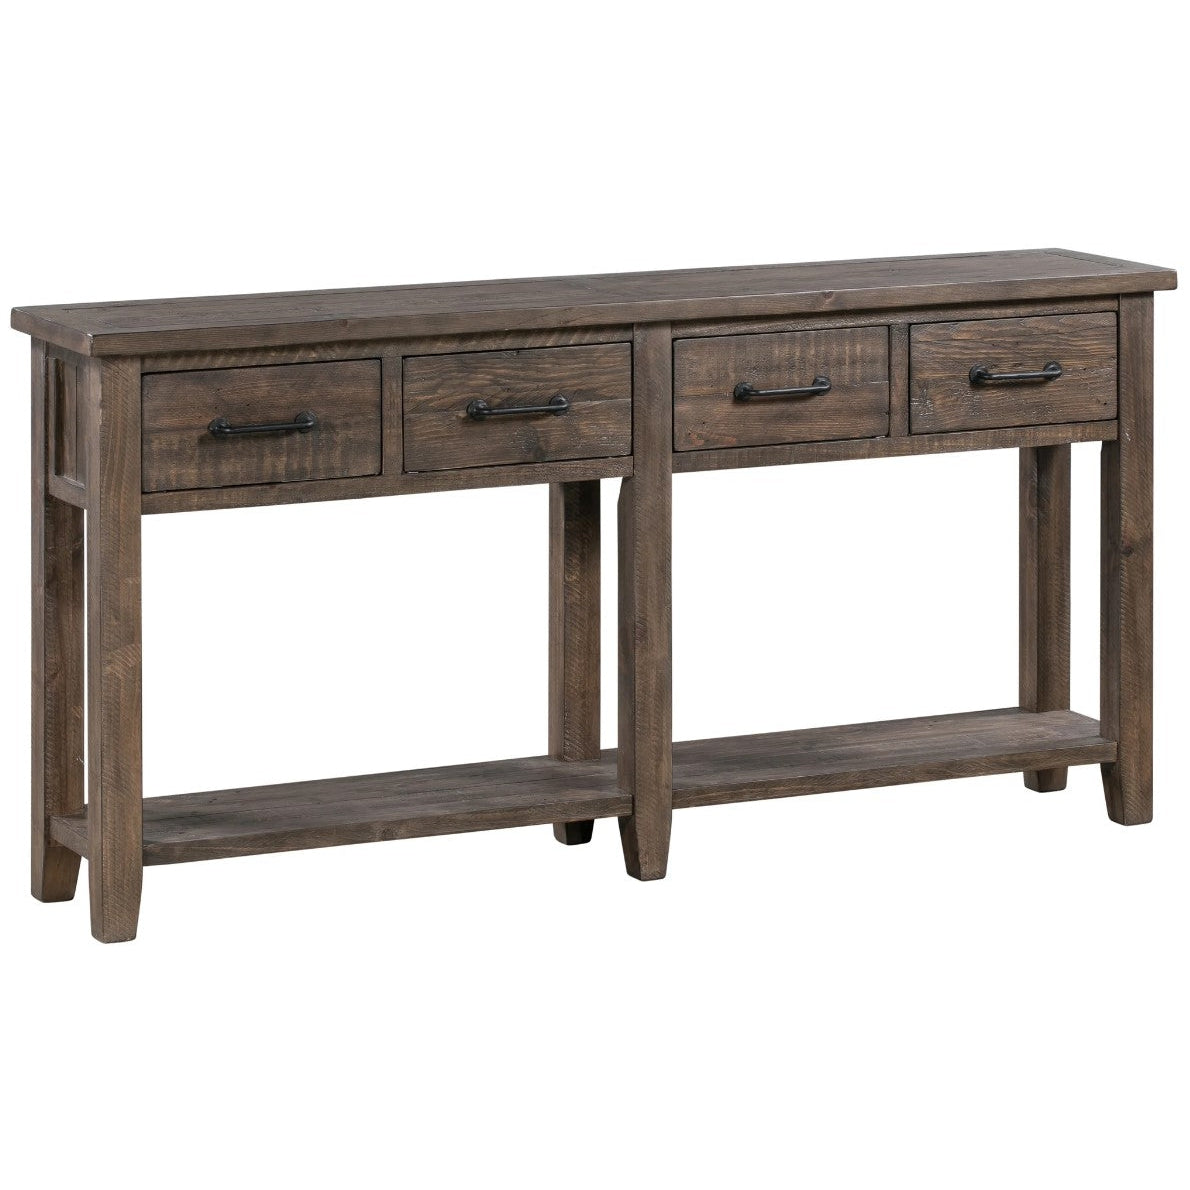 Crestview Collection Pembroke 68" x 14" x 34" 4-Drawer Rustic Plantation Recycled Pine Console In Tavern Finish